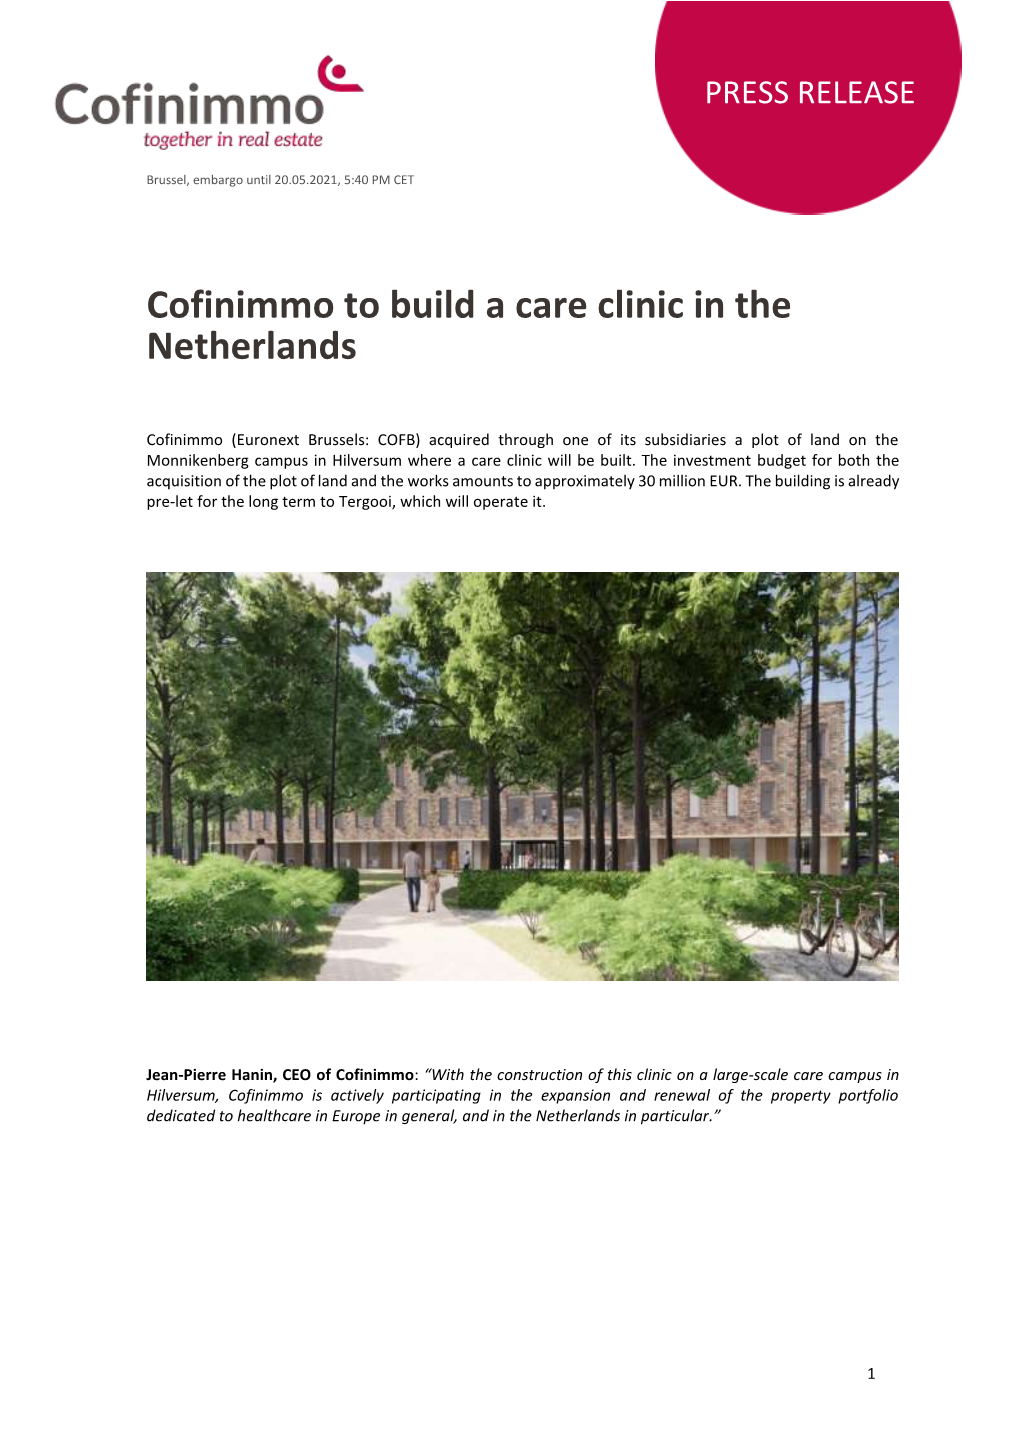 Cofinimmo to Build a Care Clinic in the Netherlands